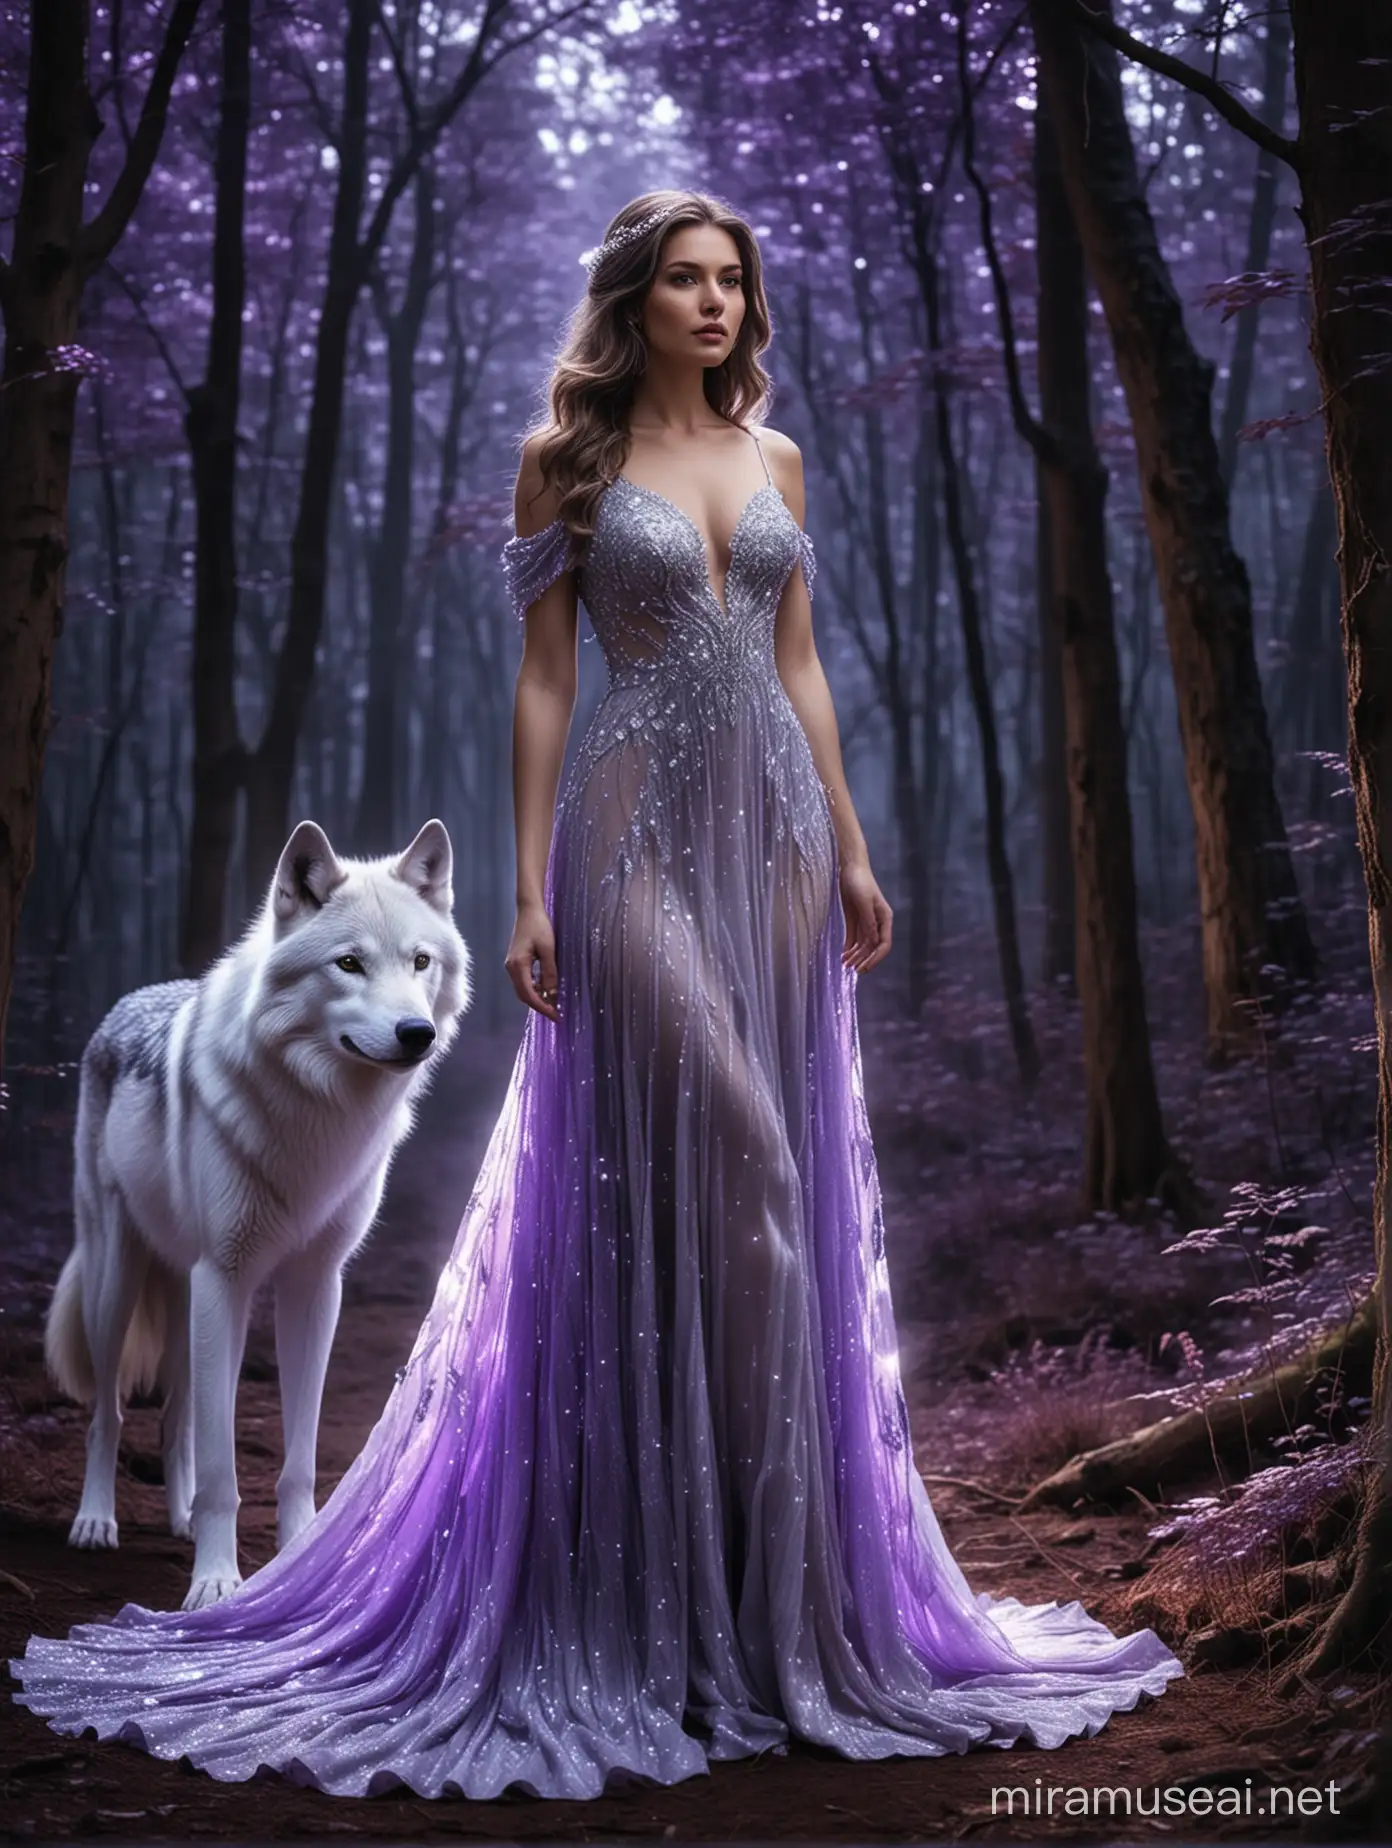 A beautiful lady in a gorgeous sparkling dress with a luminous purple white color wolf standing behind her in the dark forest